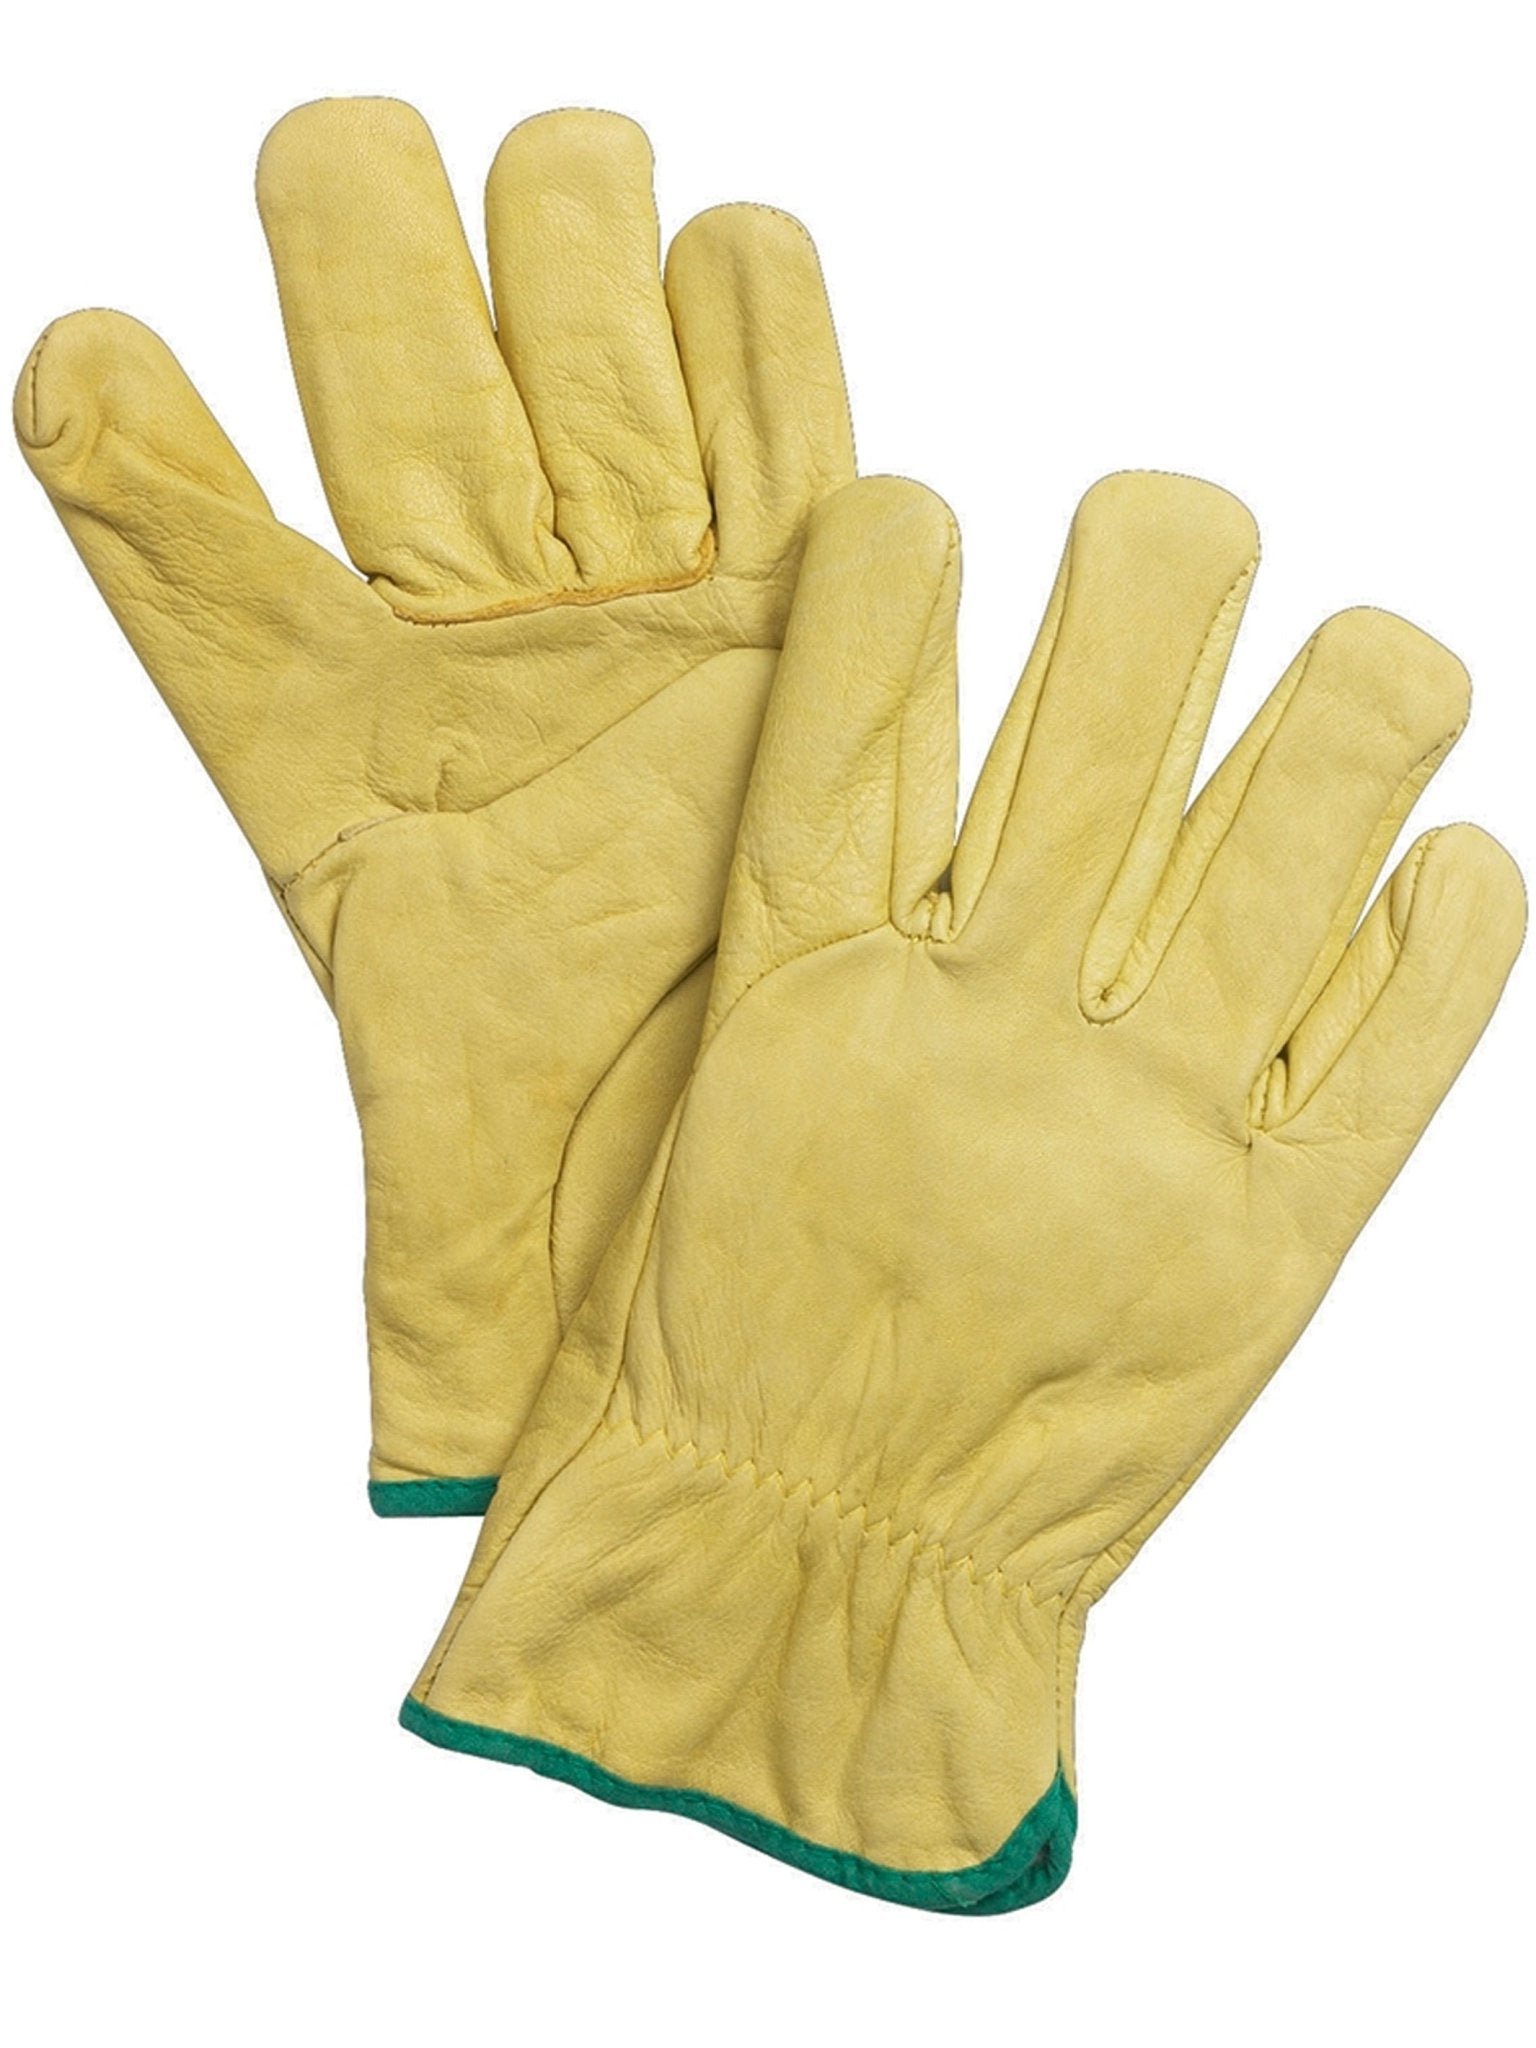 4elementsclothingHoggs of FifeHoggs of Fife - Lined Leather Driver Gloves / Outdoor / Gardening glovesGlovesDRGL/YE/3